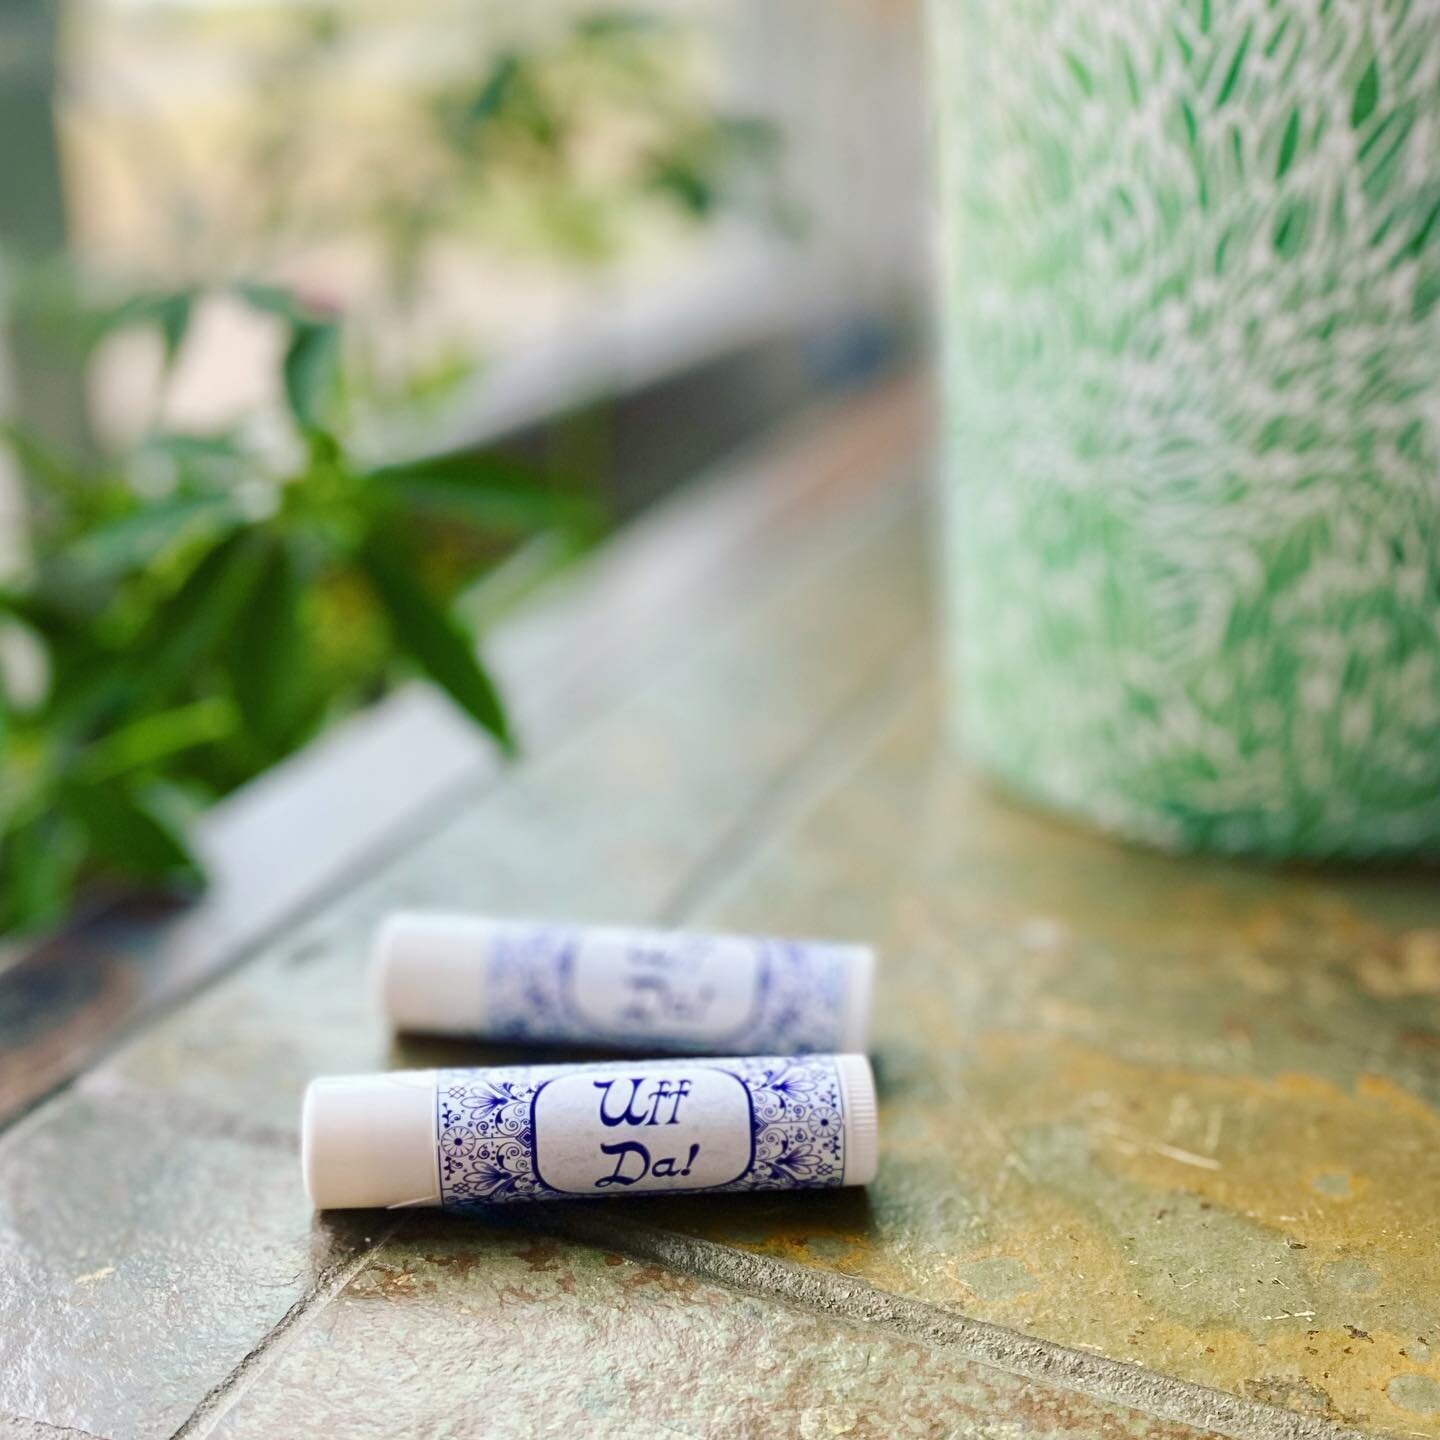 An Uff Da kind of day 🇳🇴
&bull;
&bull;
&bull;
&bull;

#smallbusiness #lipbalm #privatelabel #allnatural #safeskincare #privatelabel #wisconsinsmallbusiness #womenowned #eauclaire #womenownedbusiness #intaca #advertising #somethingspecialfromwiscons